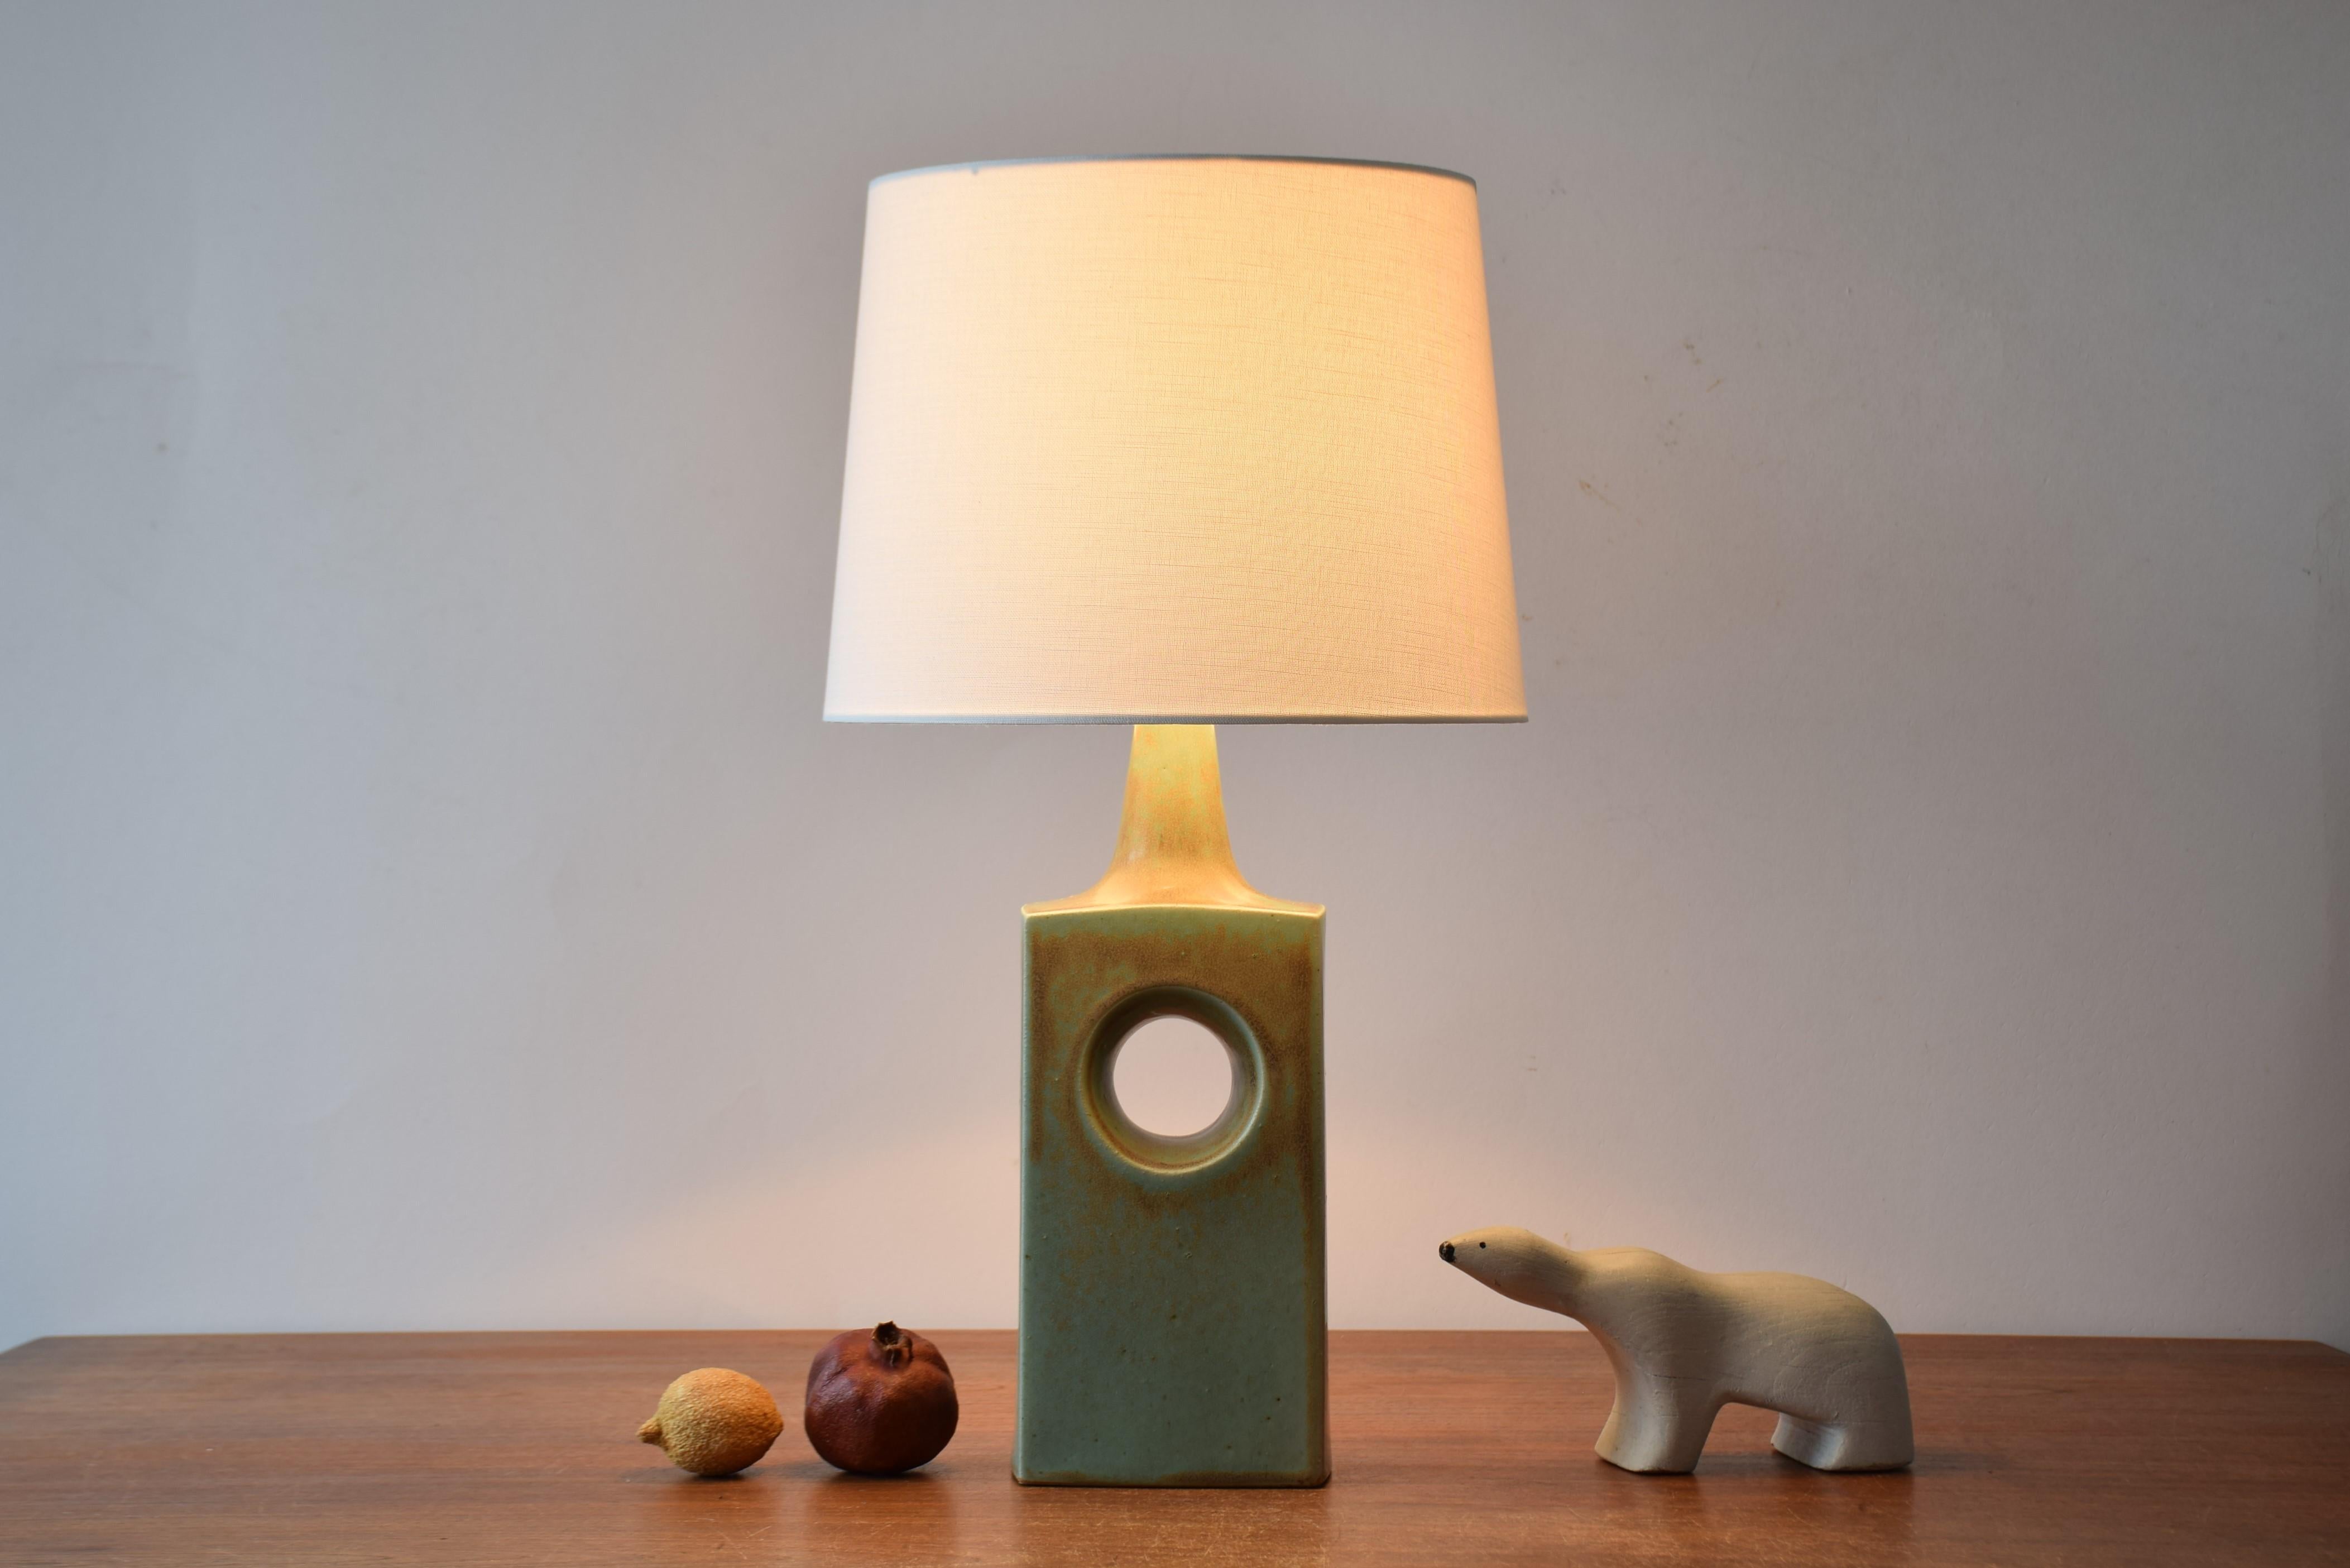 Midcentury Danish table lamp from the ceramic workshop Knabstrup. Made circa 1960s.
This lamp is from the Knabstrup Atelier series. The design could be by Richard Manz.

The lamp has an interesting glaze in sage green with ochre brown areas and